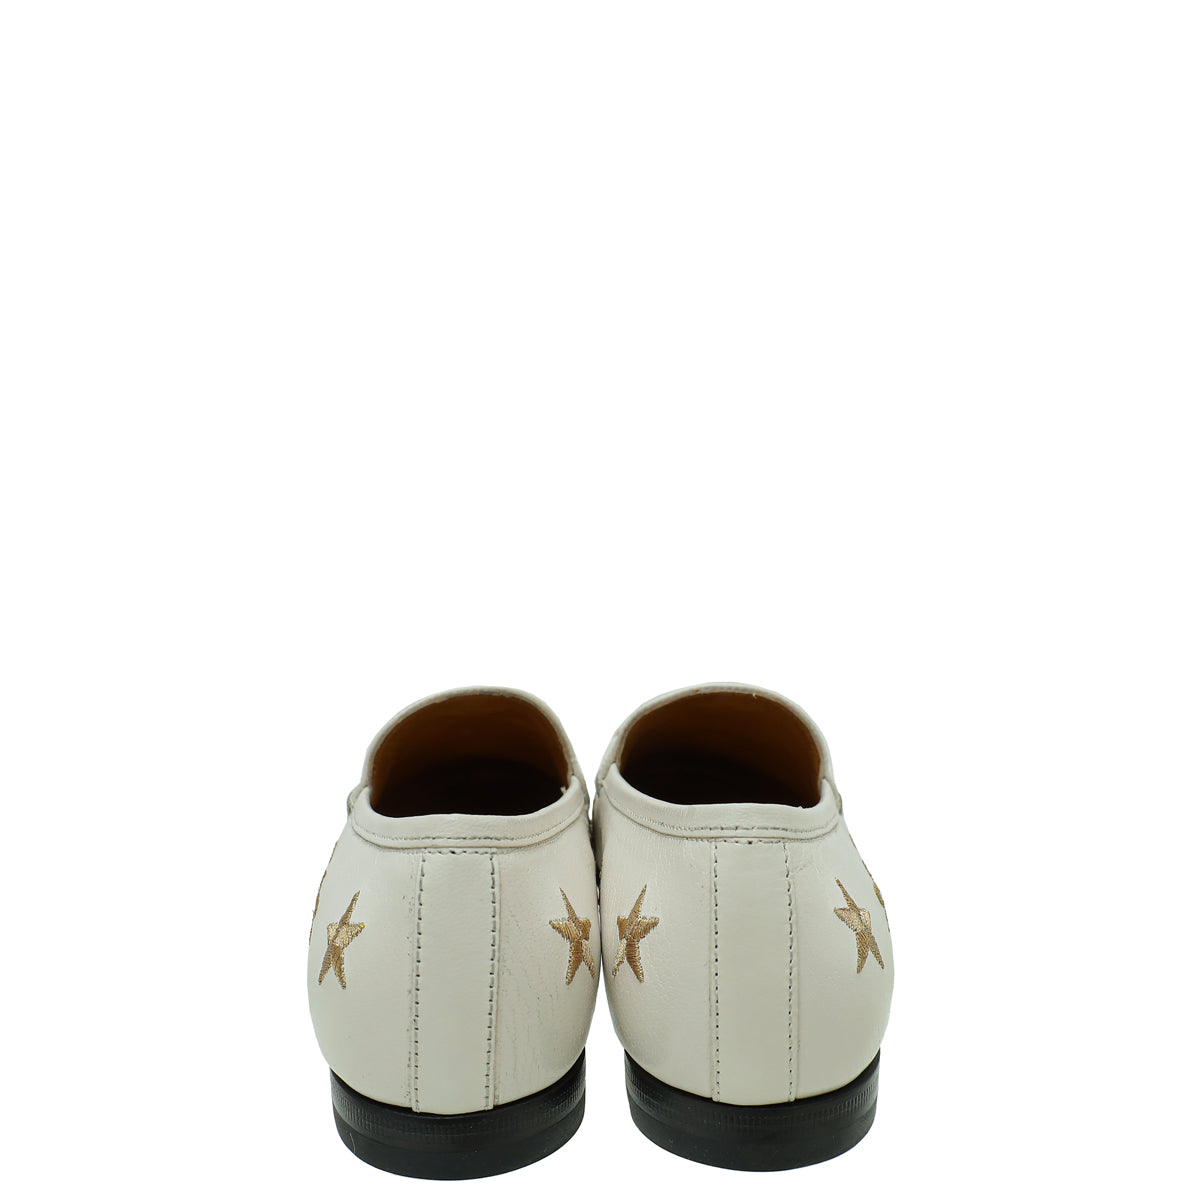 Gucci Mystic White Bee Star Embroidered Jordaan Horsebit Loafer 36.5